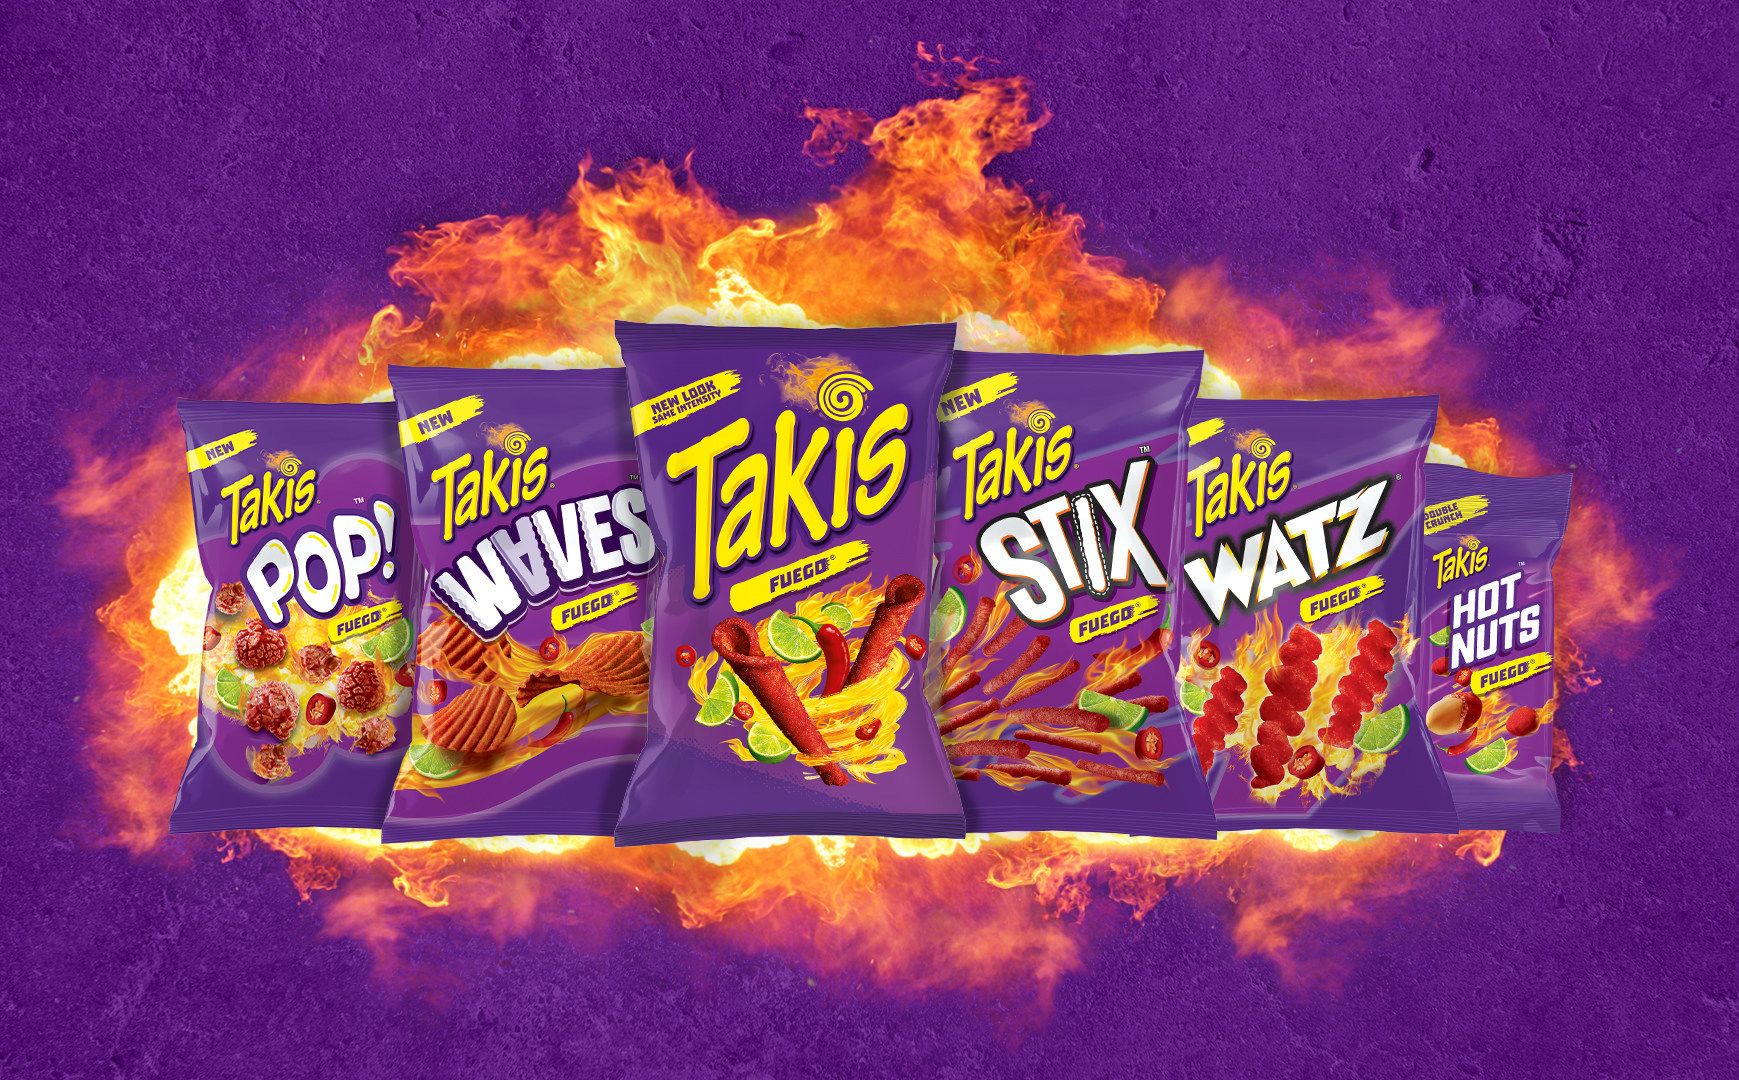 Takis Expands with New Snack Lines.